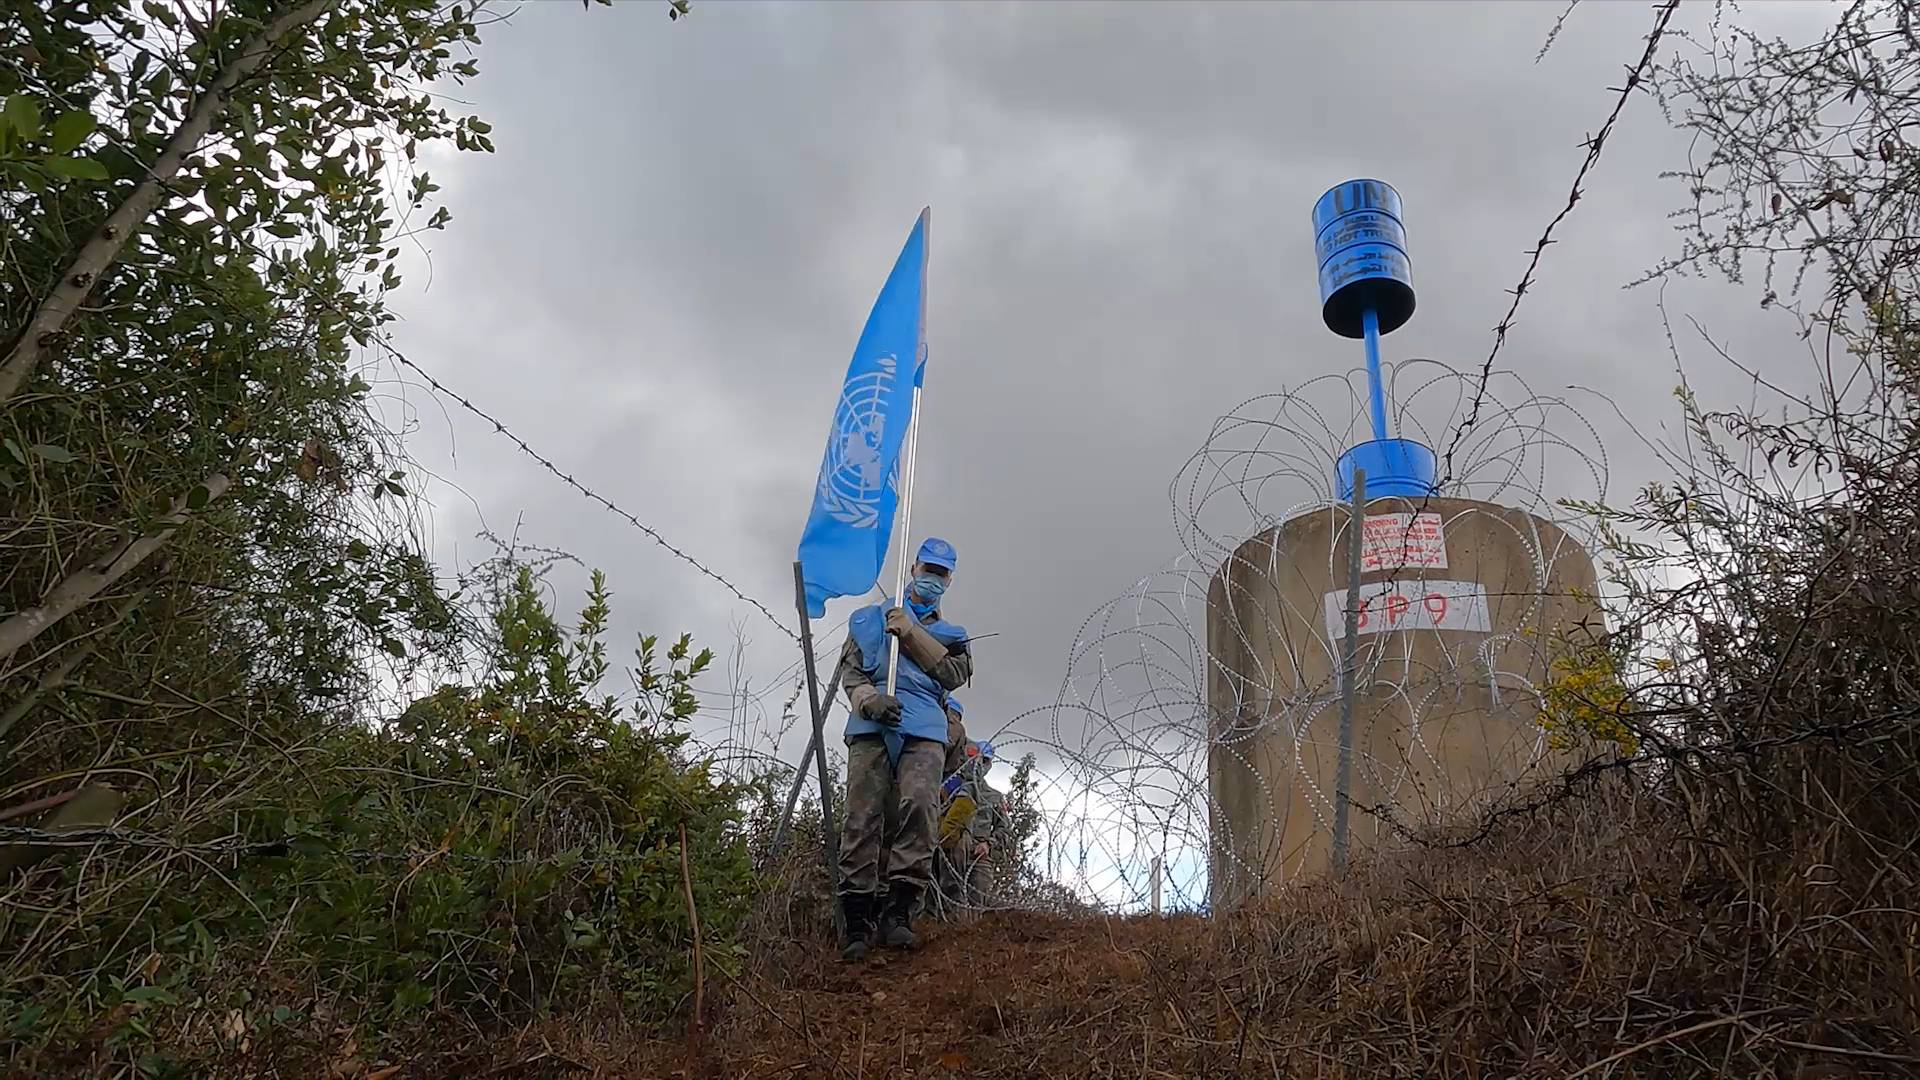 GLOBALink | Chinese "blue helmets" carry out demining operation along Israel-Lebanon border